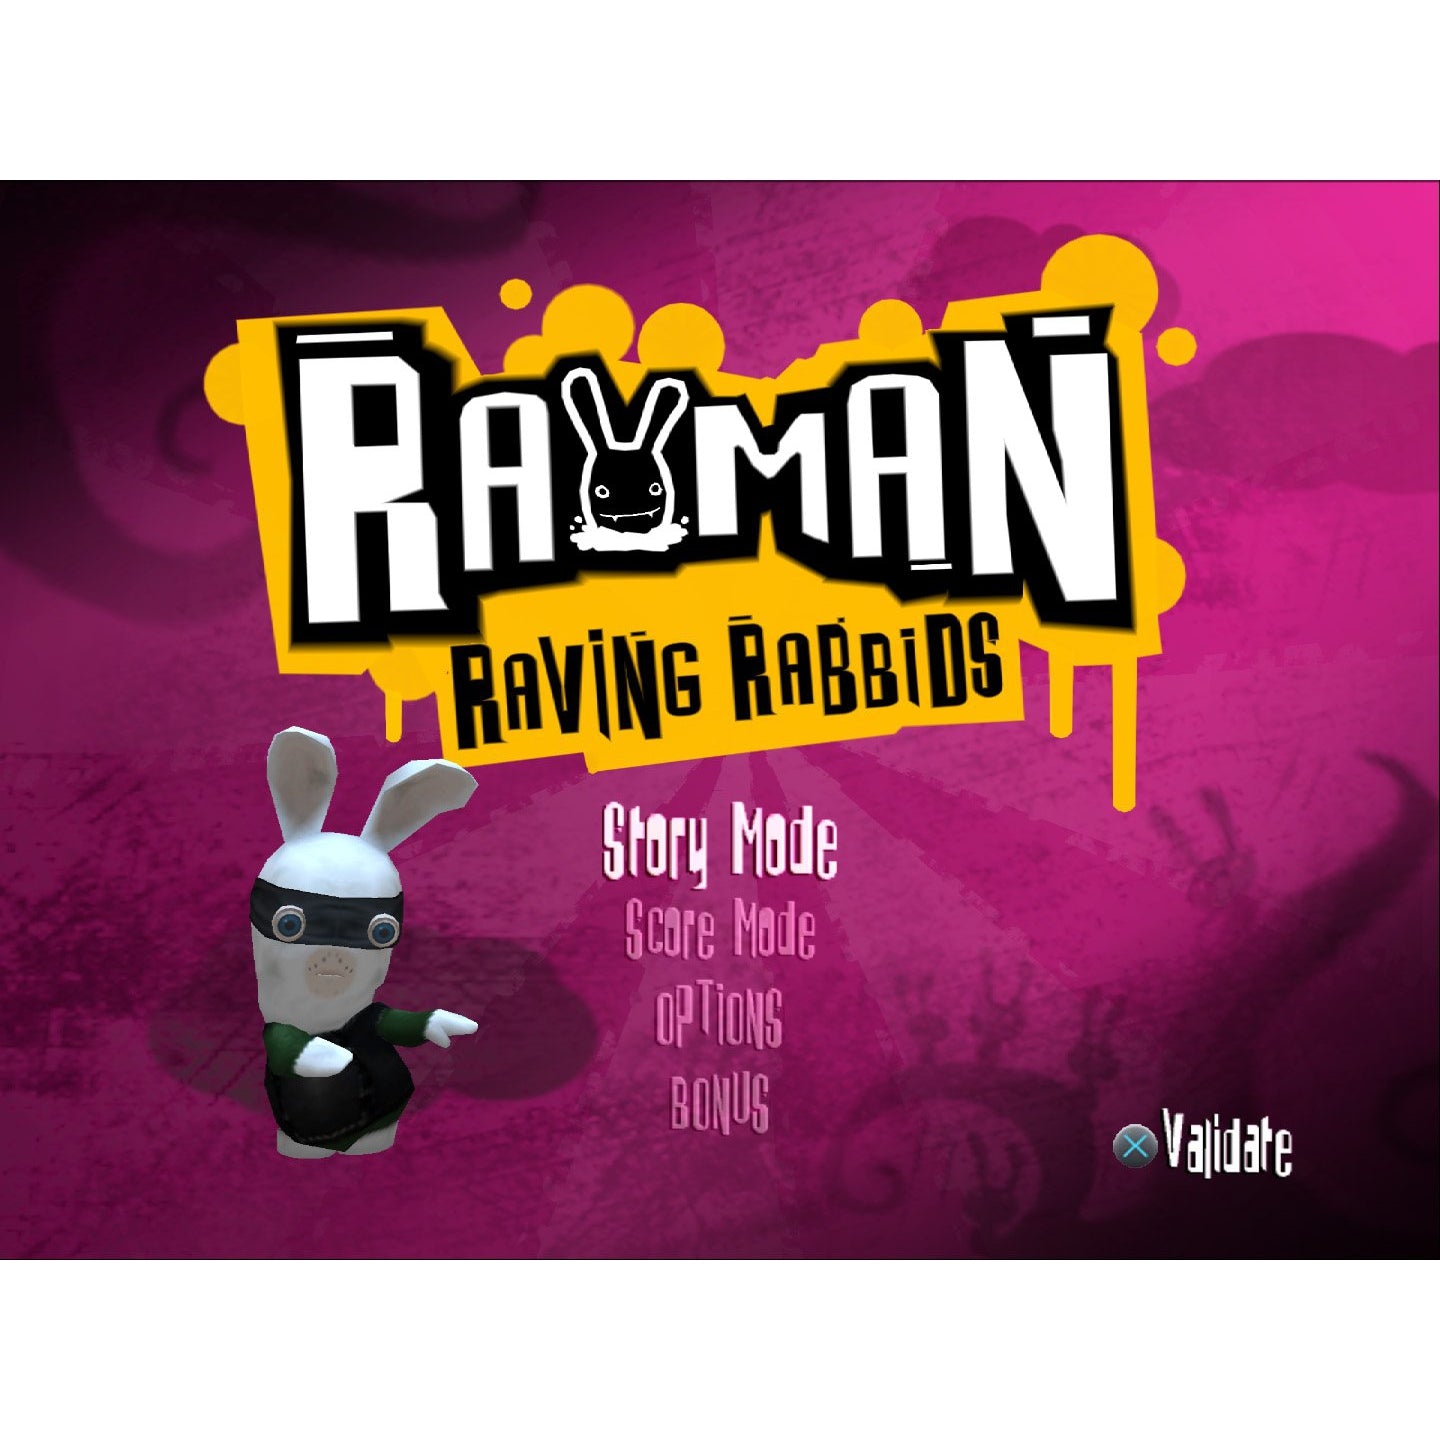 Rayman: Raving Rabibds - PlayStation 2 (PS2) Game Complete - YourGamingShop.com - Buy, Sell, Trade Video Games Online. 120 Day Warranty. Satisfaction Guaranteed.